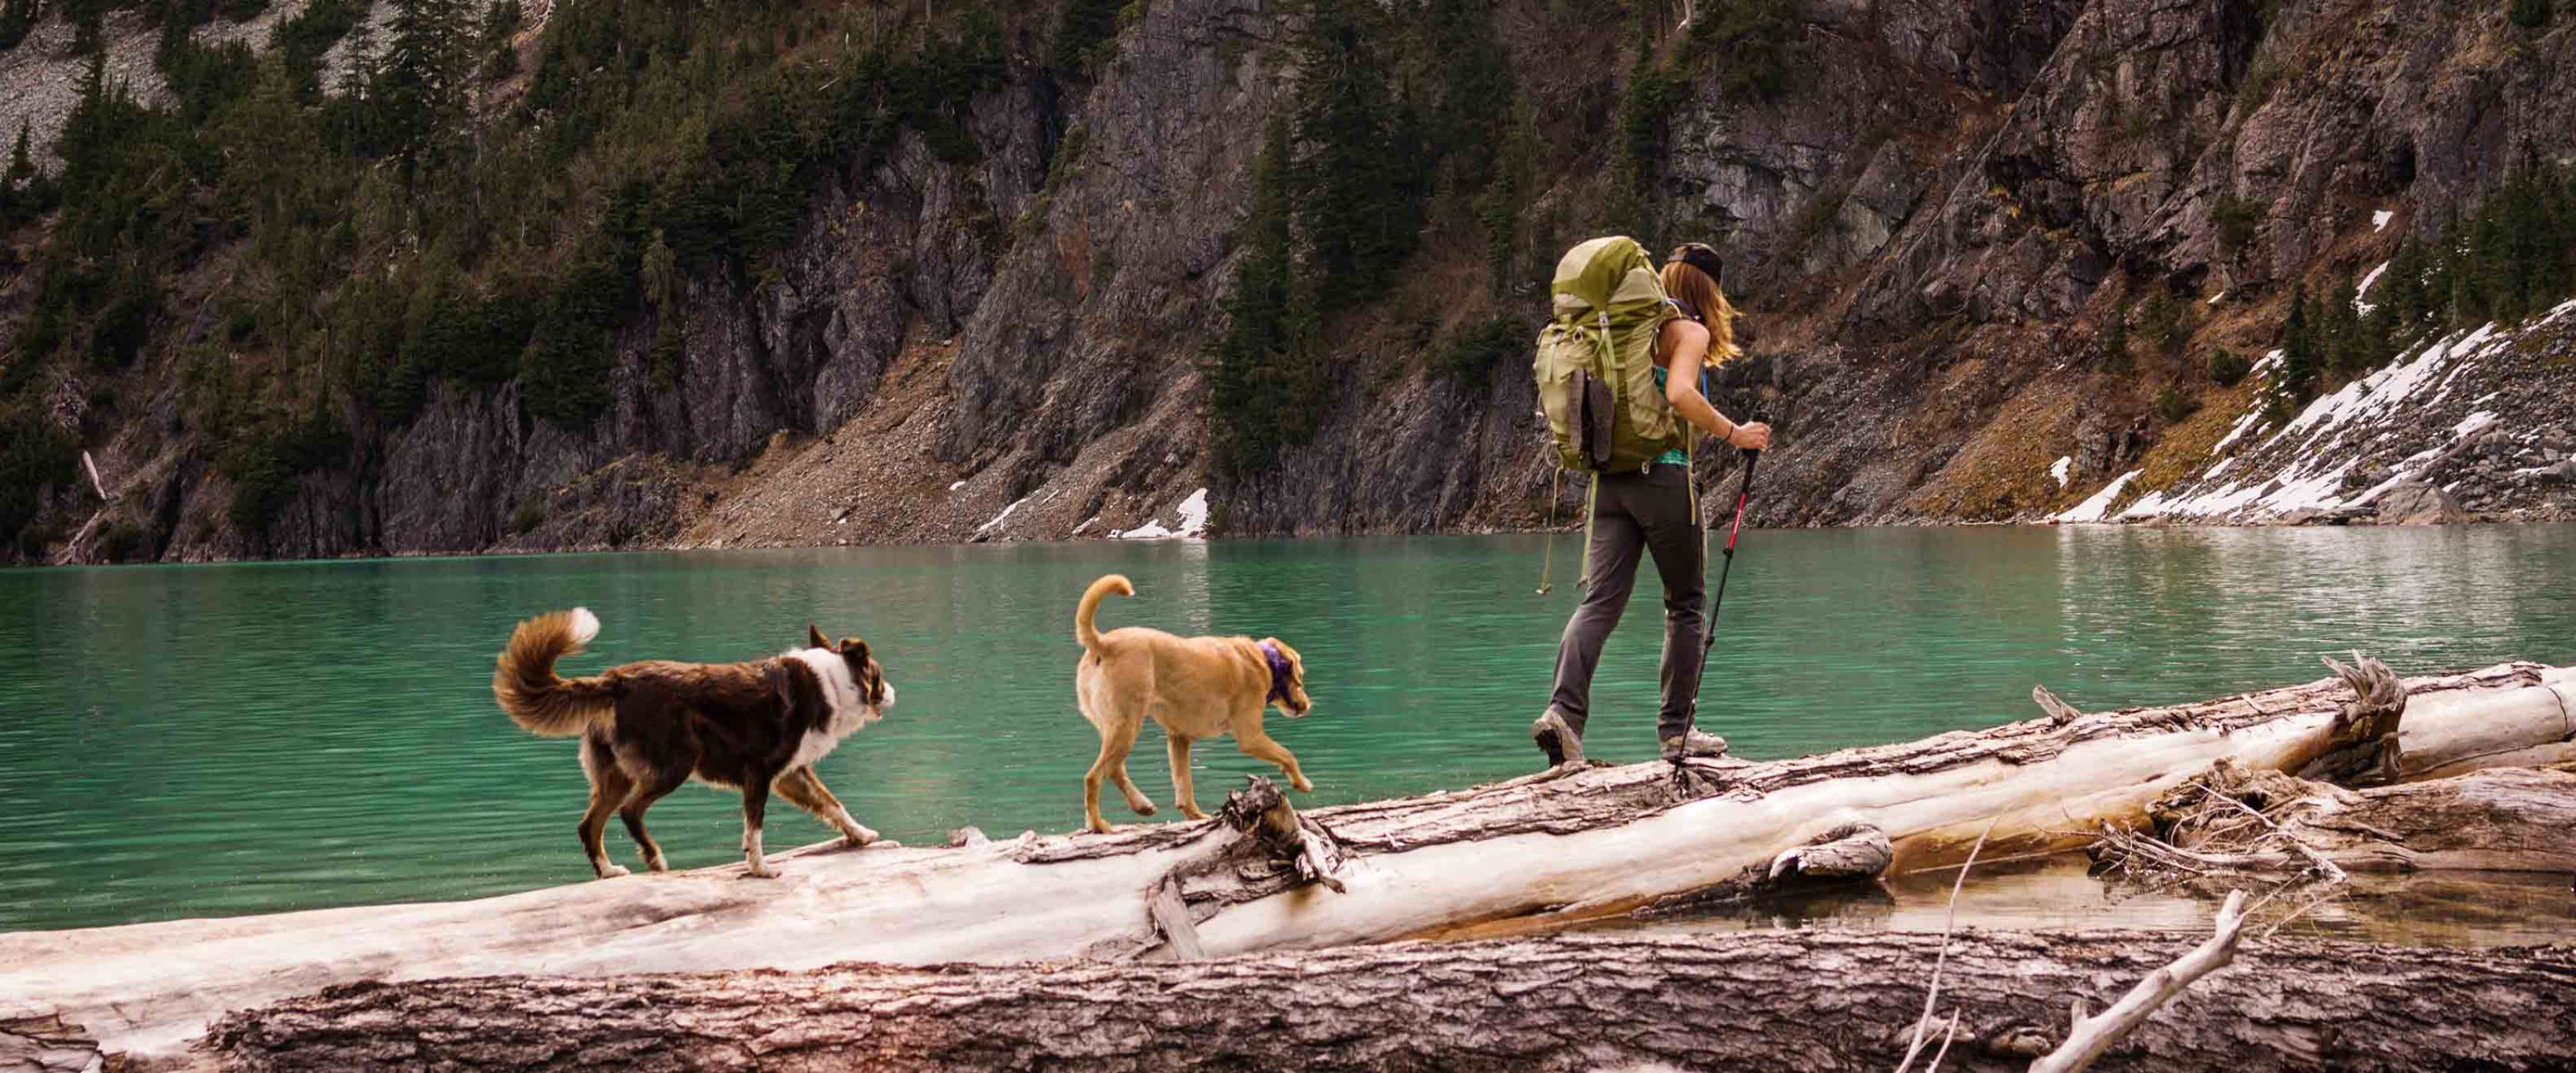 Woman and dogs walking on a log